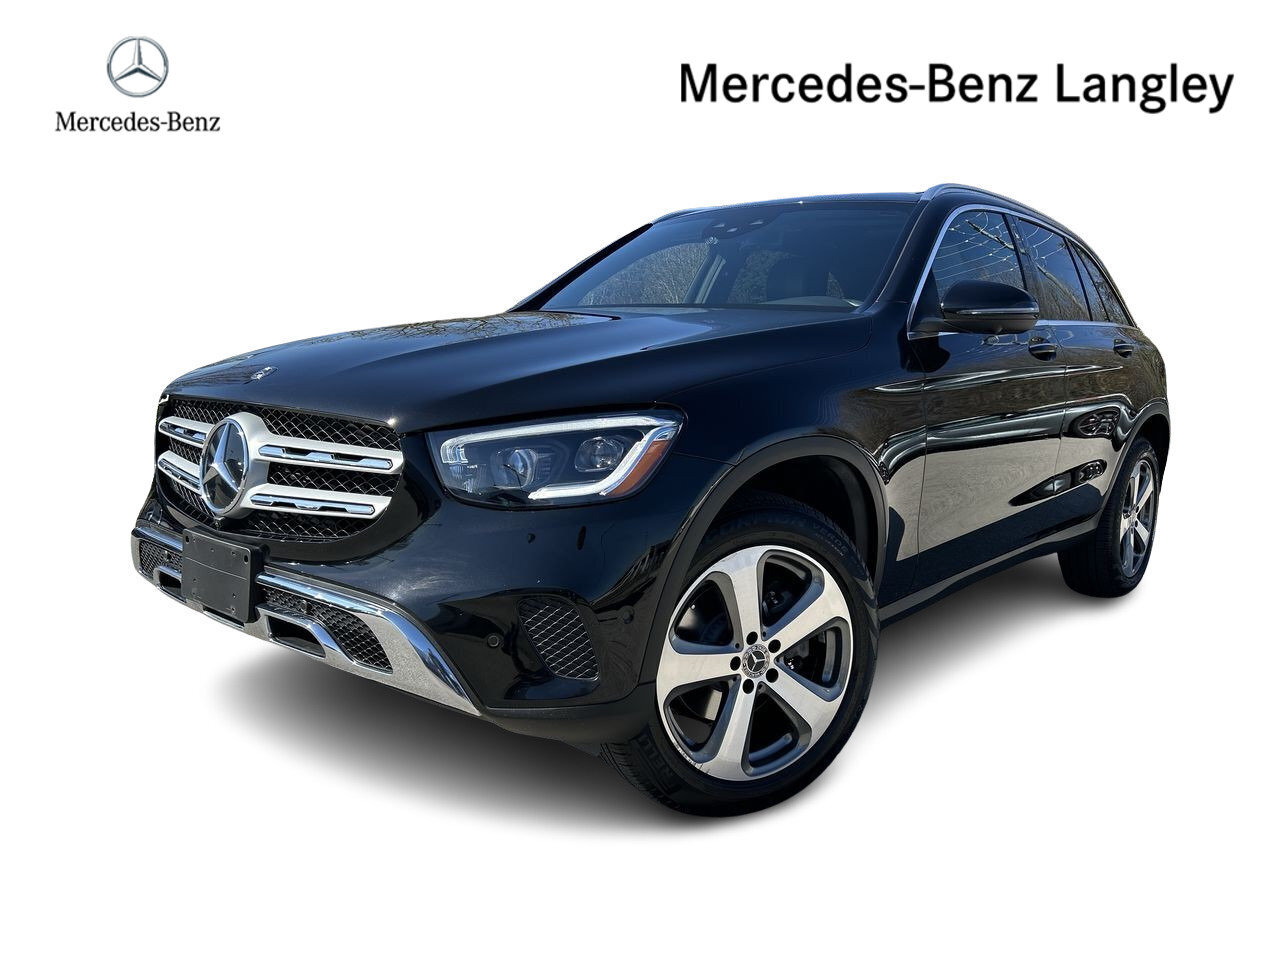 2021 Mercedes-Benz GLC300 4MATIC SUV | Low KMS | Local | Safety check | AWD 